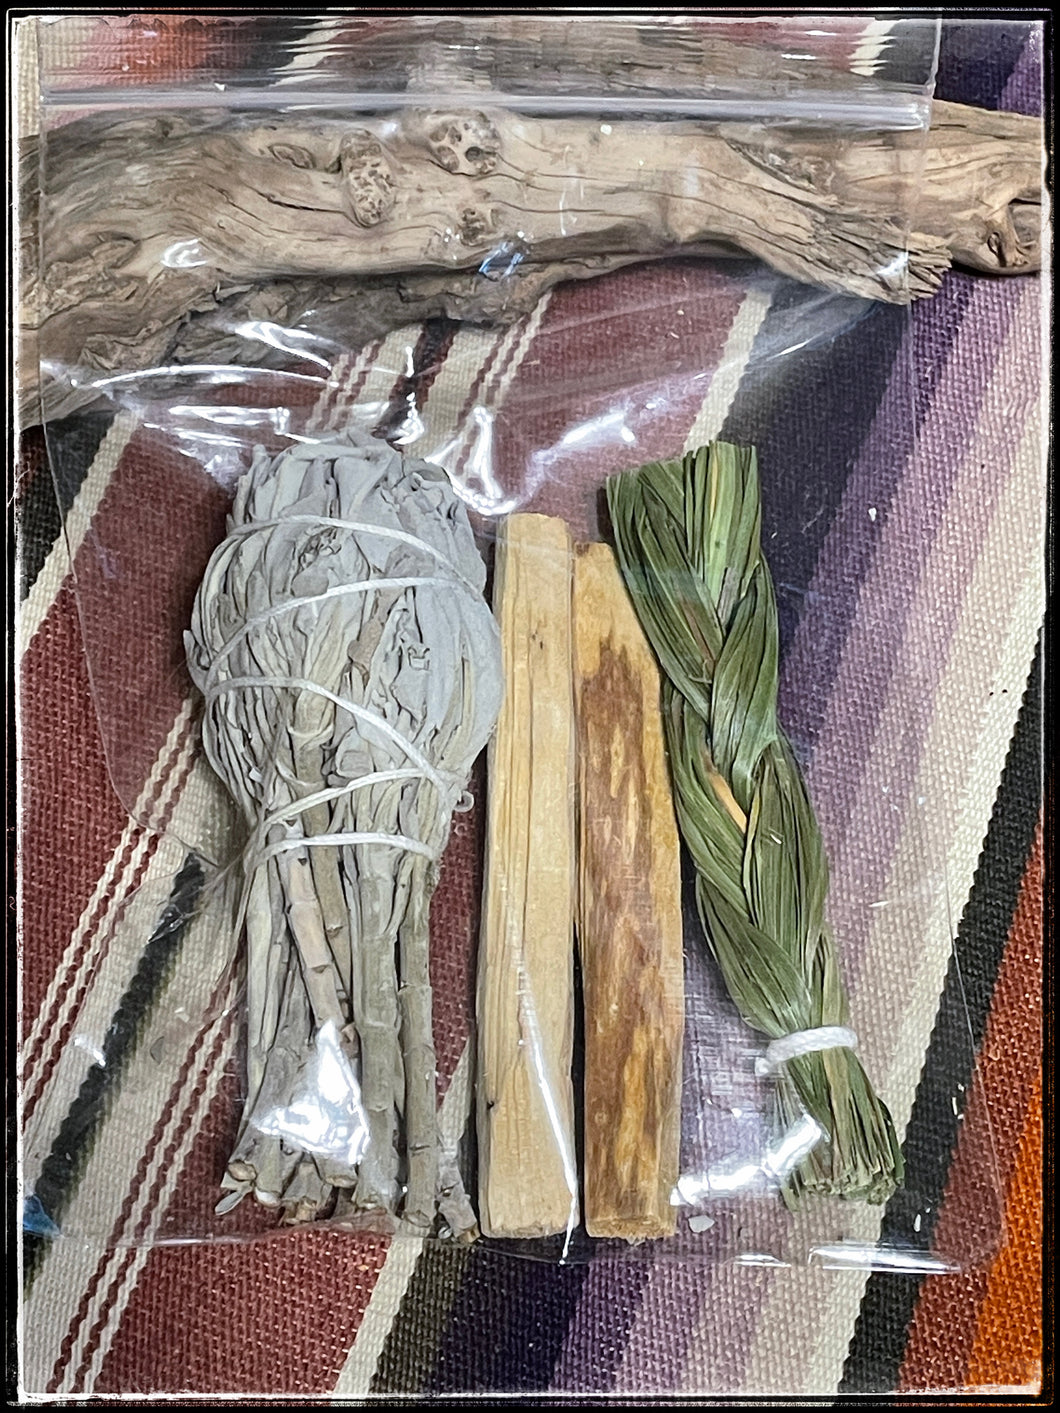 trio of White Sage, Palo Santo, and braided Sweetgrass help with protection, purification, healing, and blessings